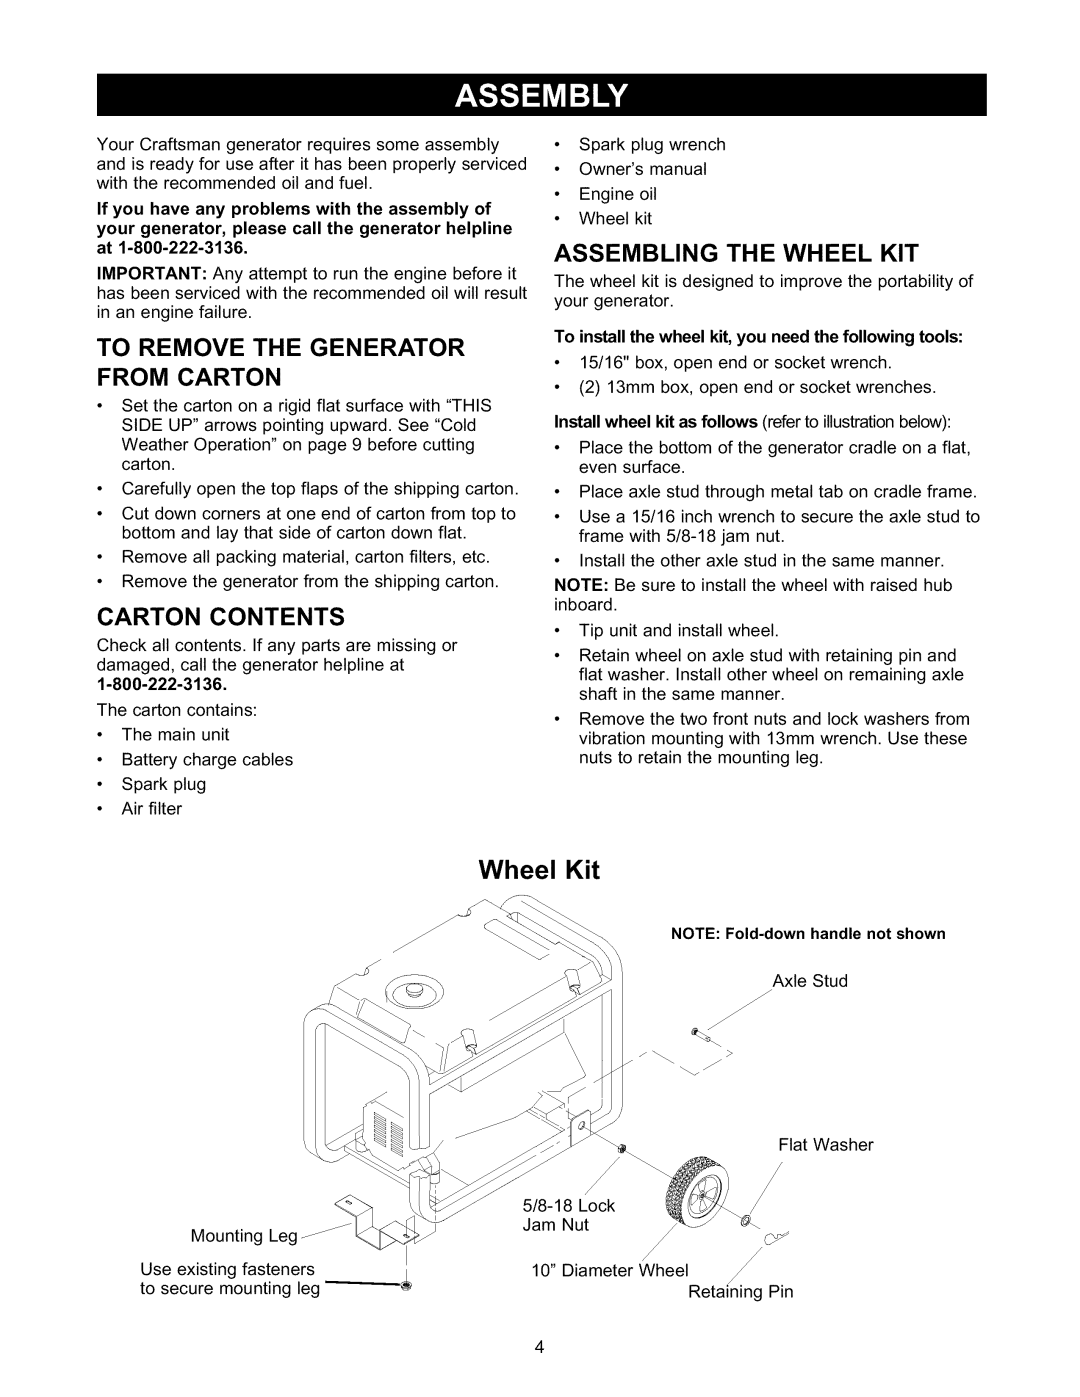 Craftsman 580.327141 owner manual Wheel Kit, inanenginefailure, To Remove The Generator From Carton, Carton Contents 